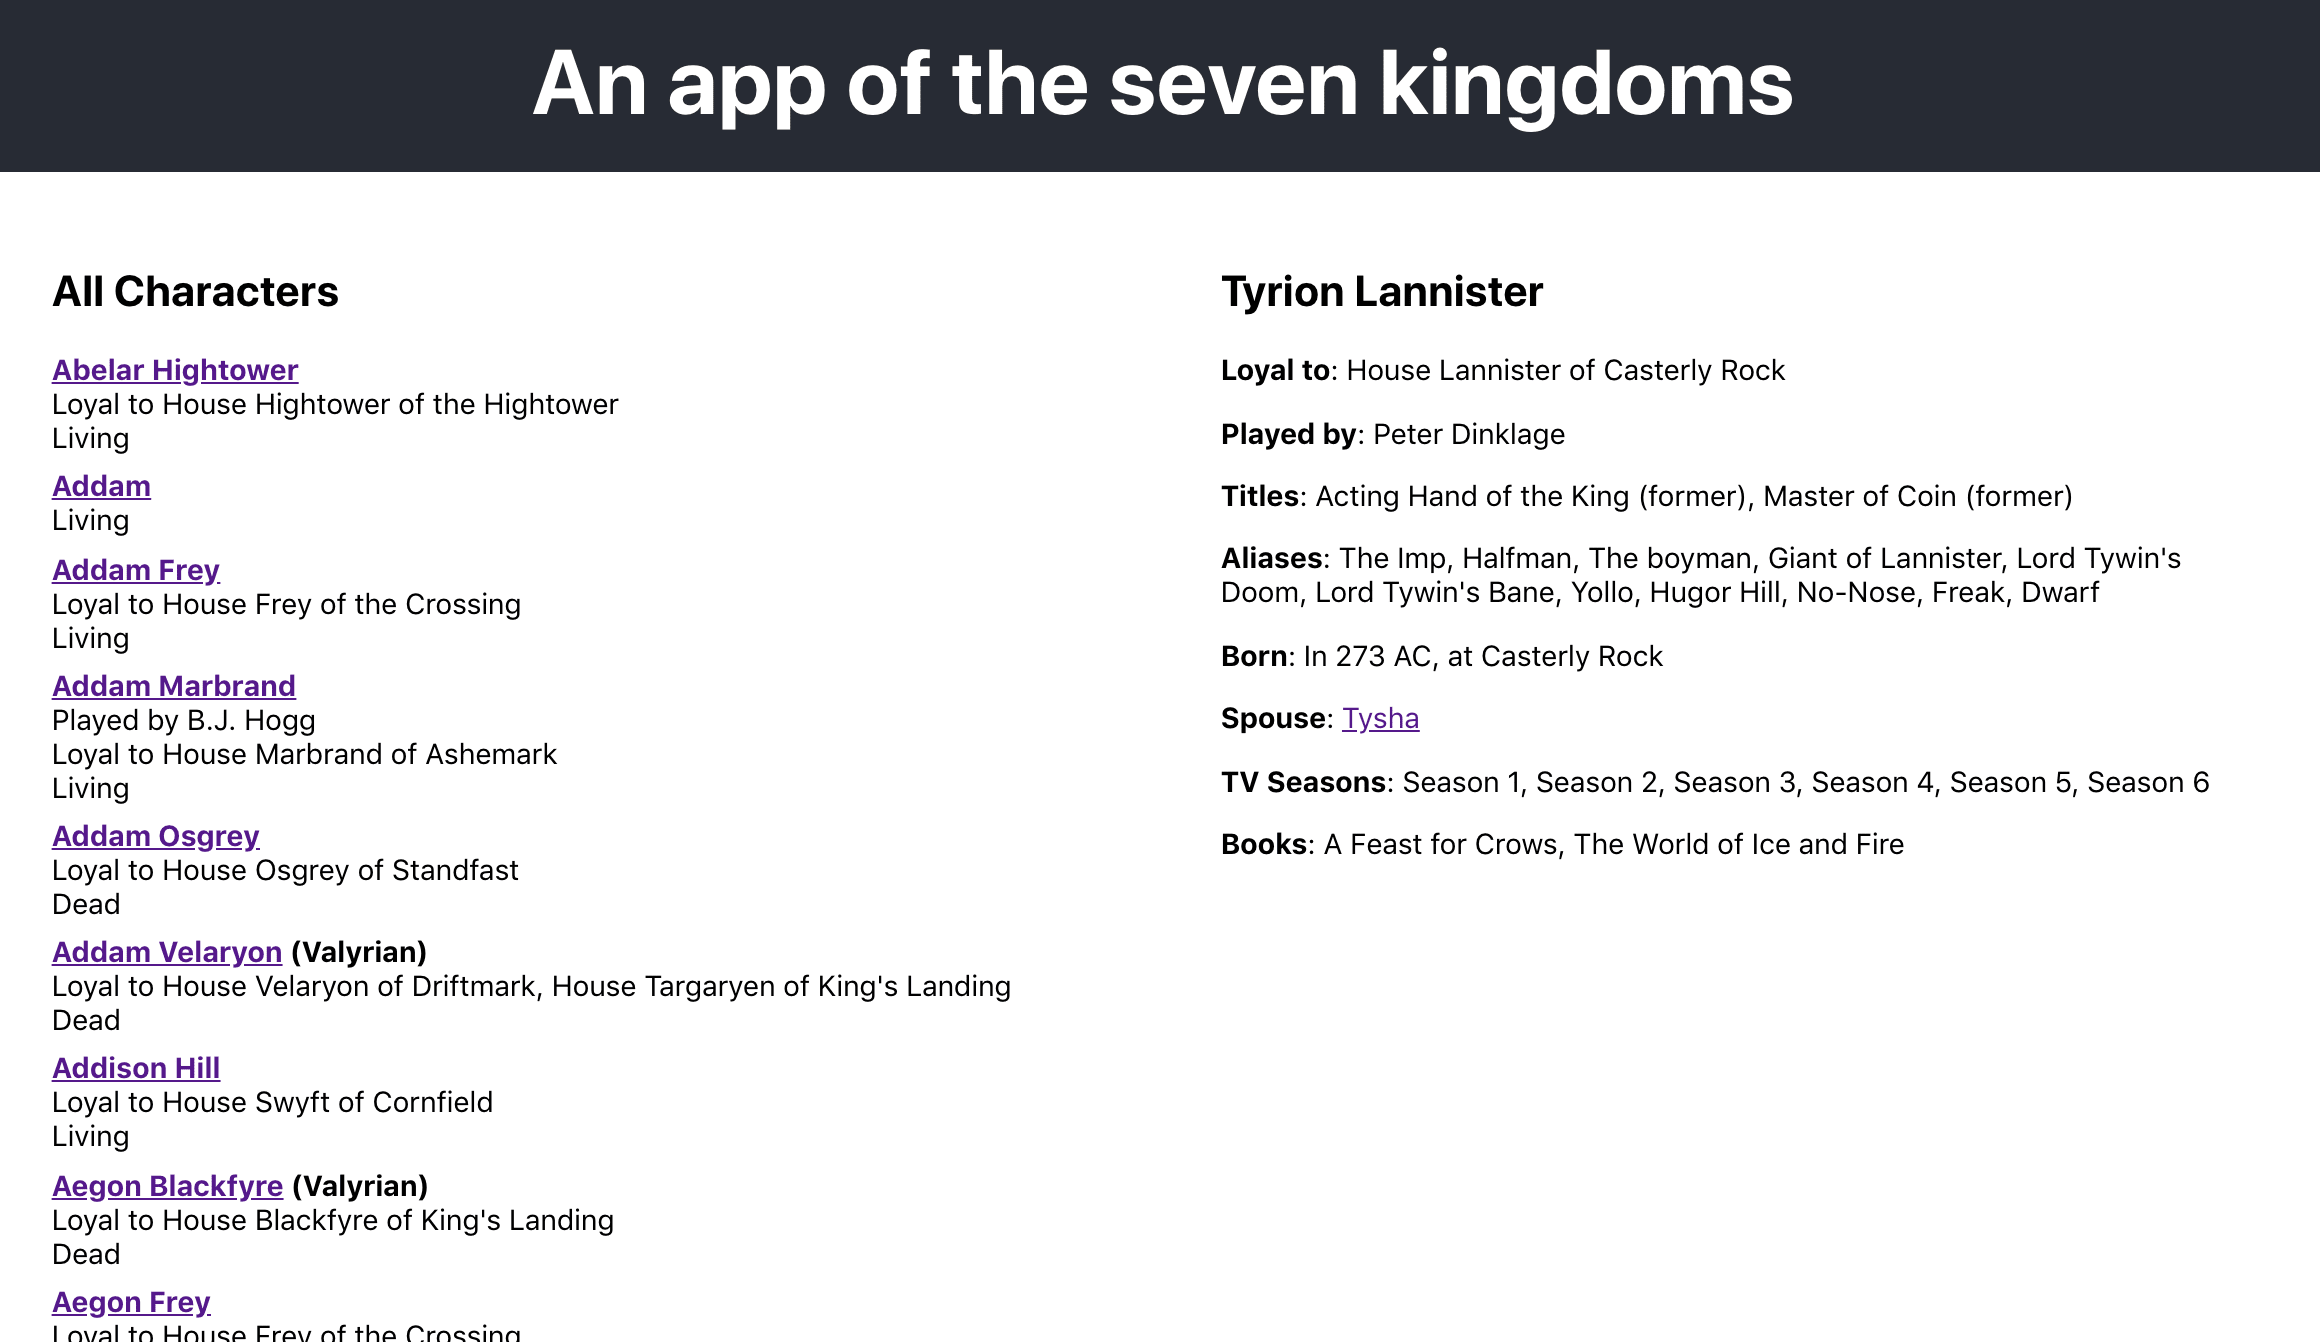 List of the characters in the app of the Seven Kingdoms